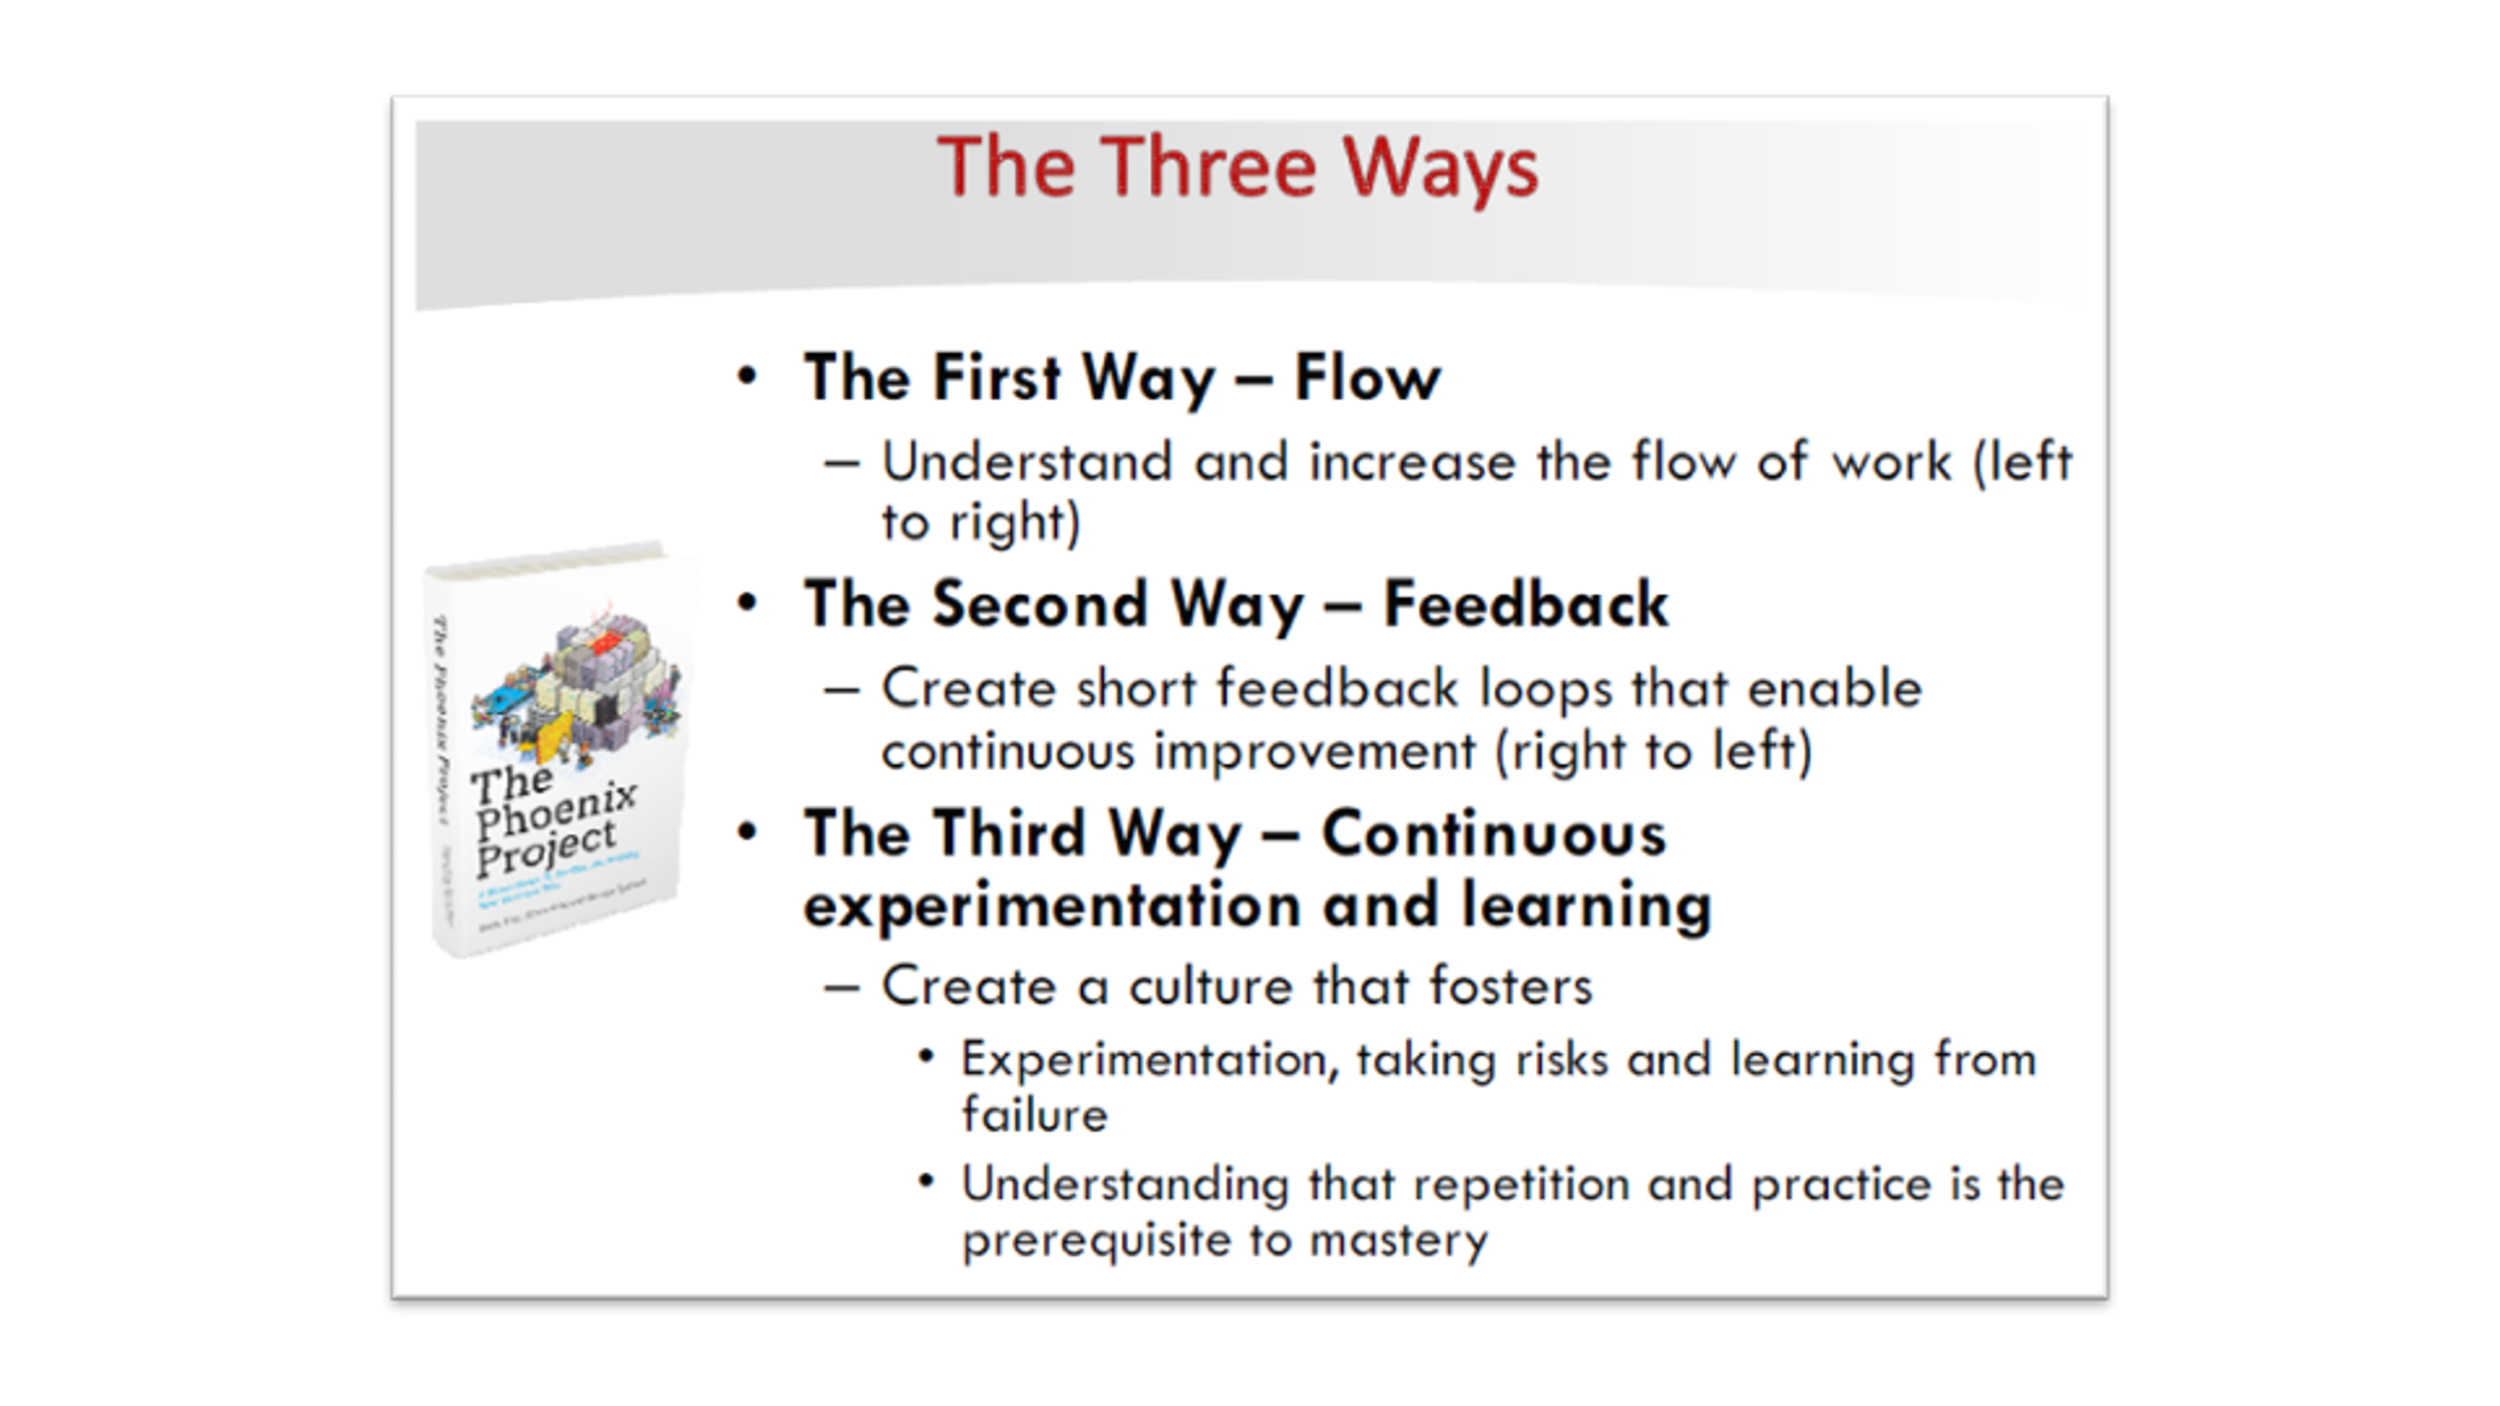 "The Three Ways" from the book "The Phoenix Project"